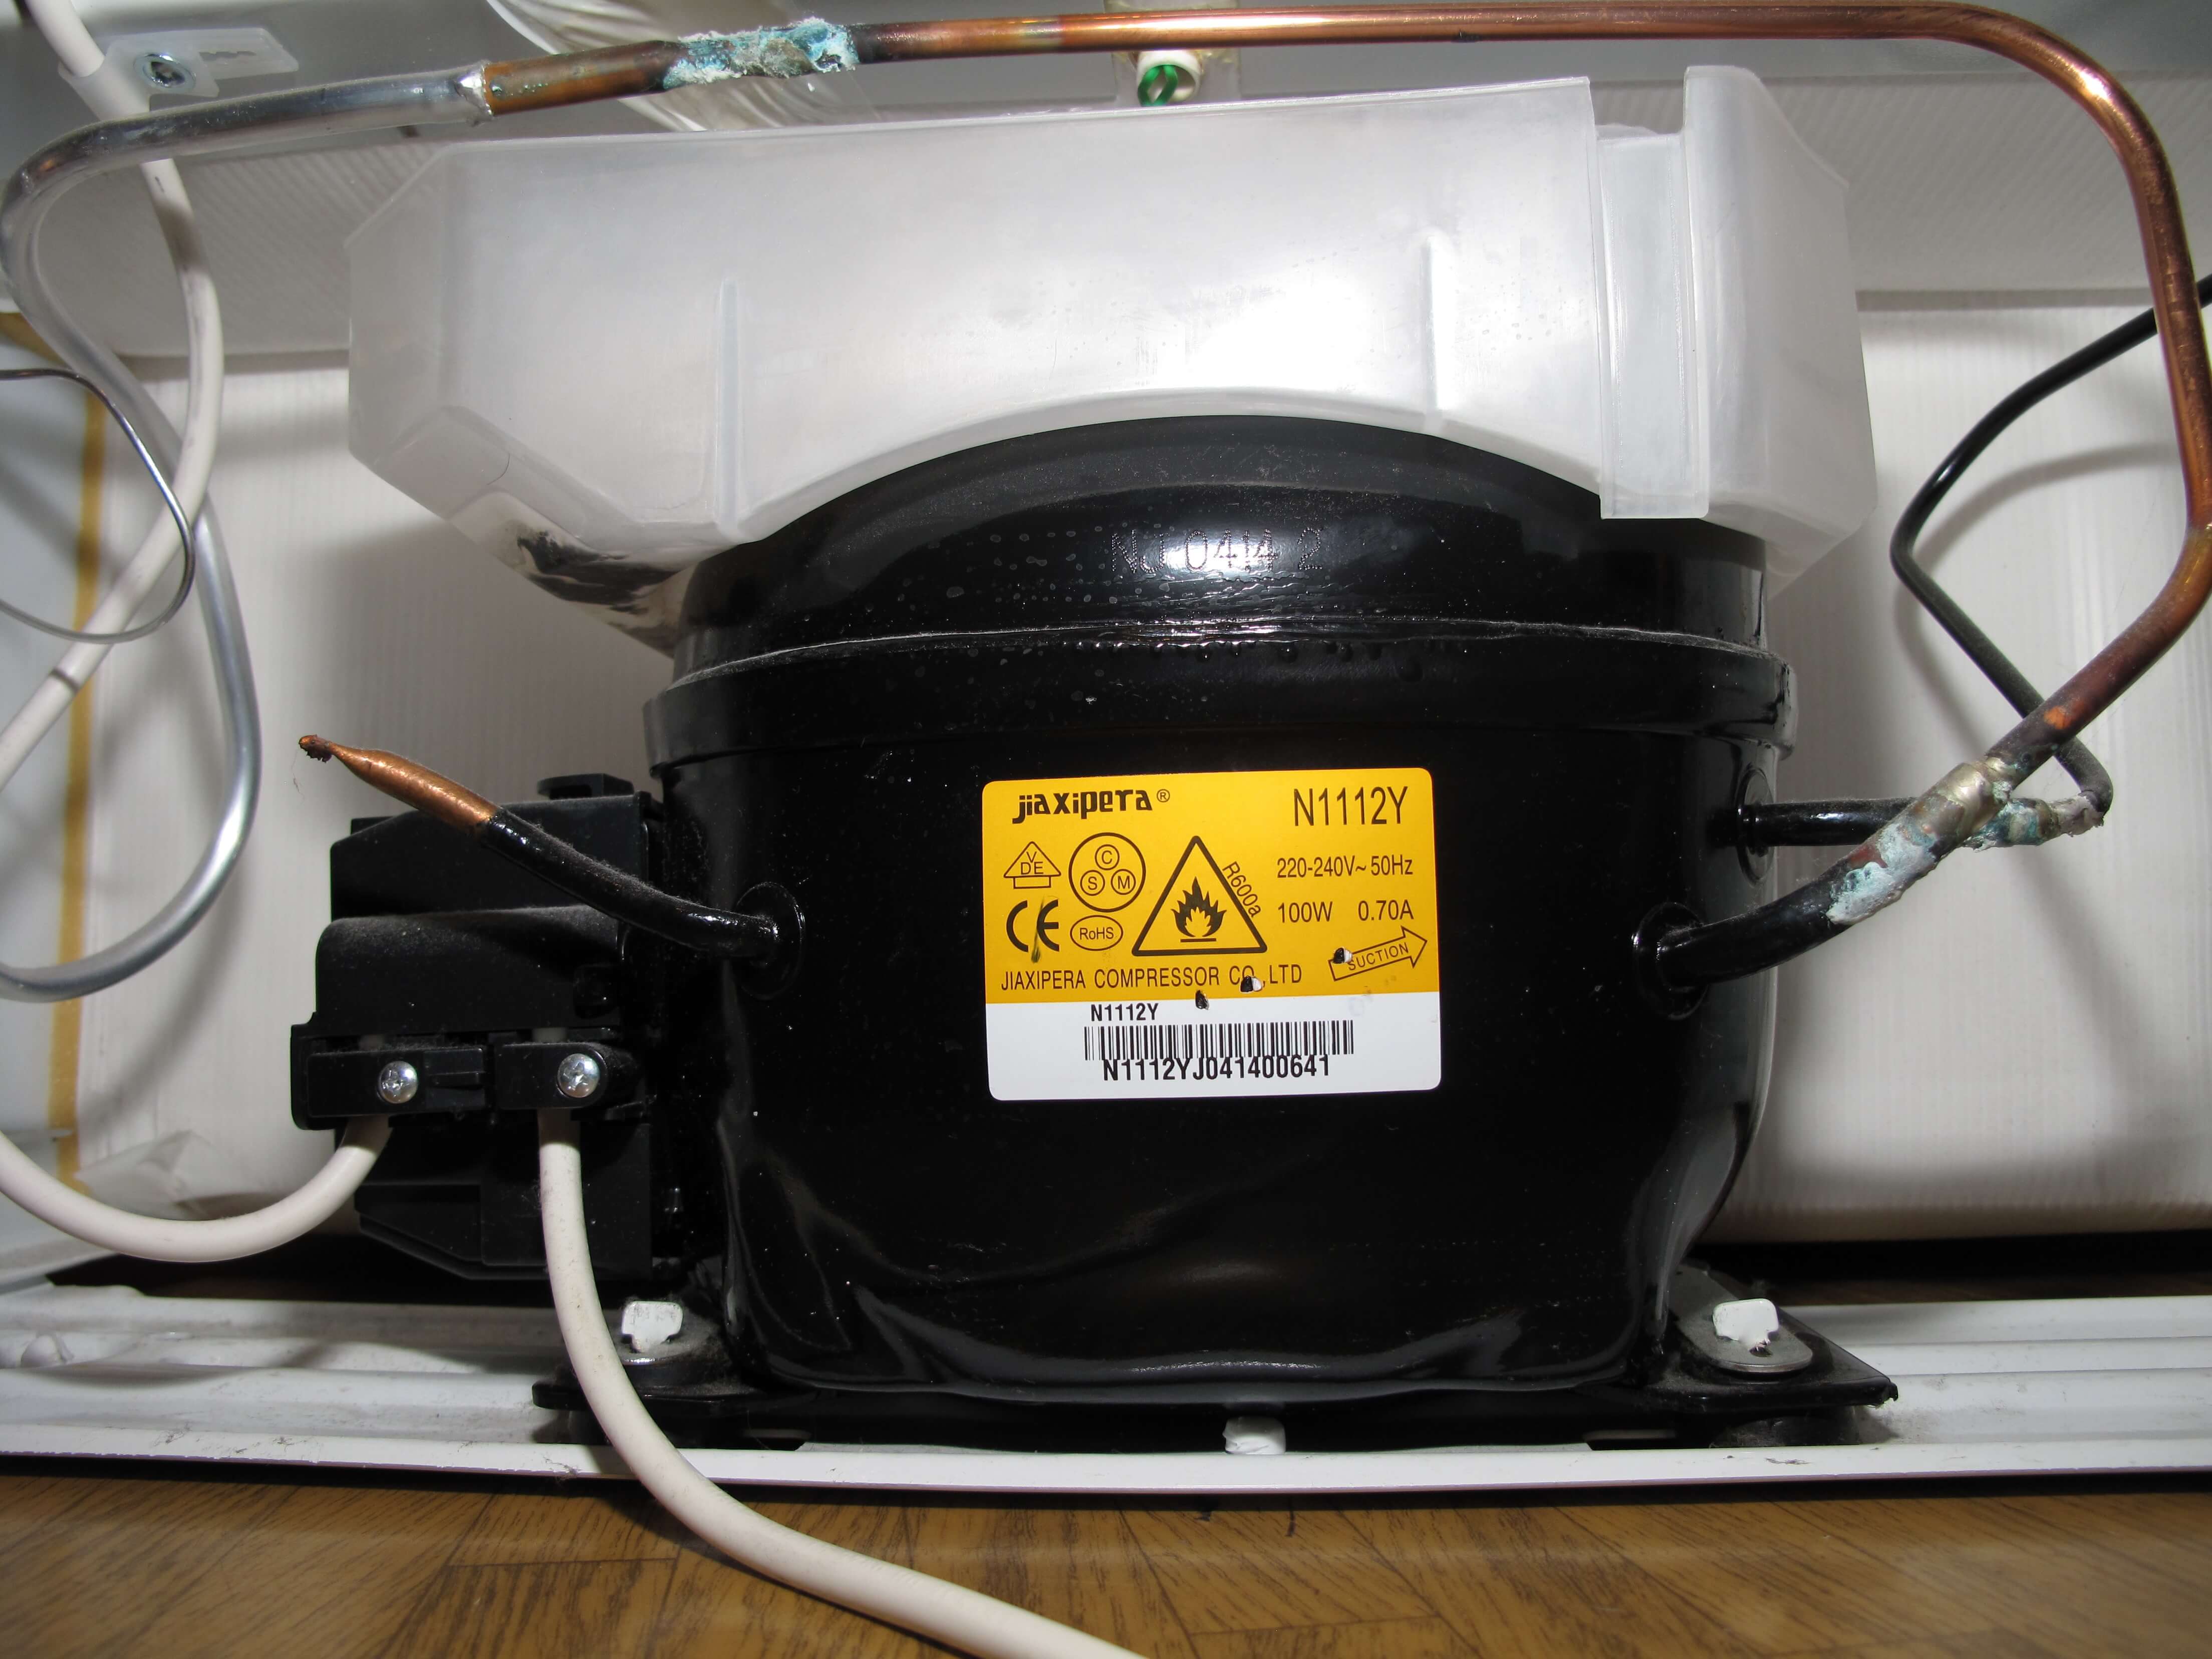 Is It Time For Compressor Refrigerator Repair?